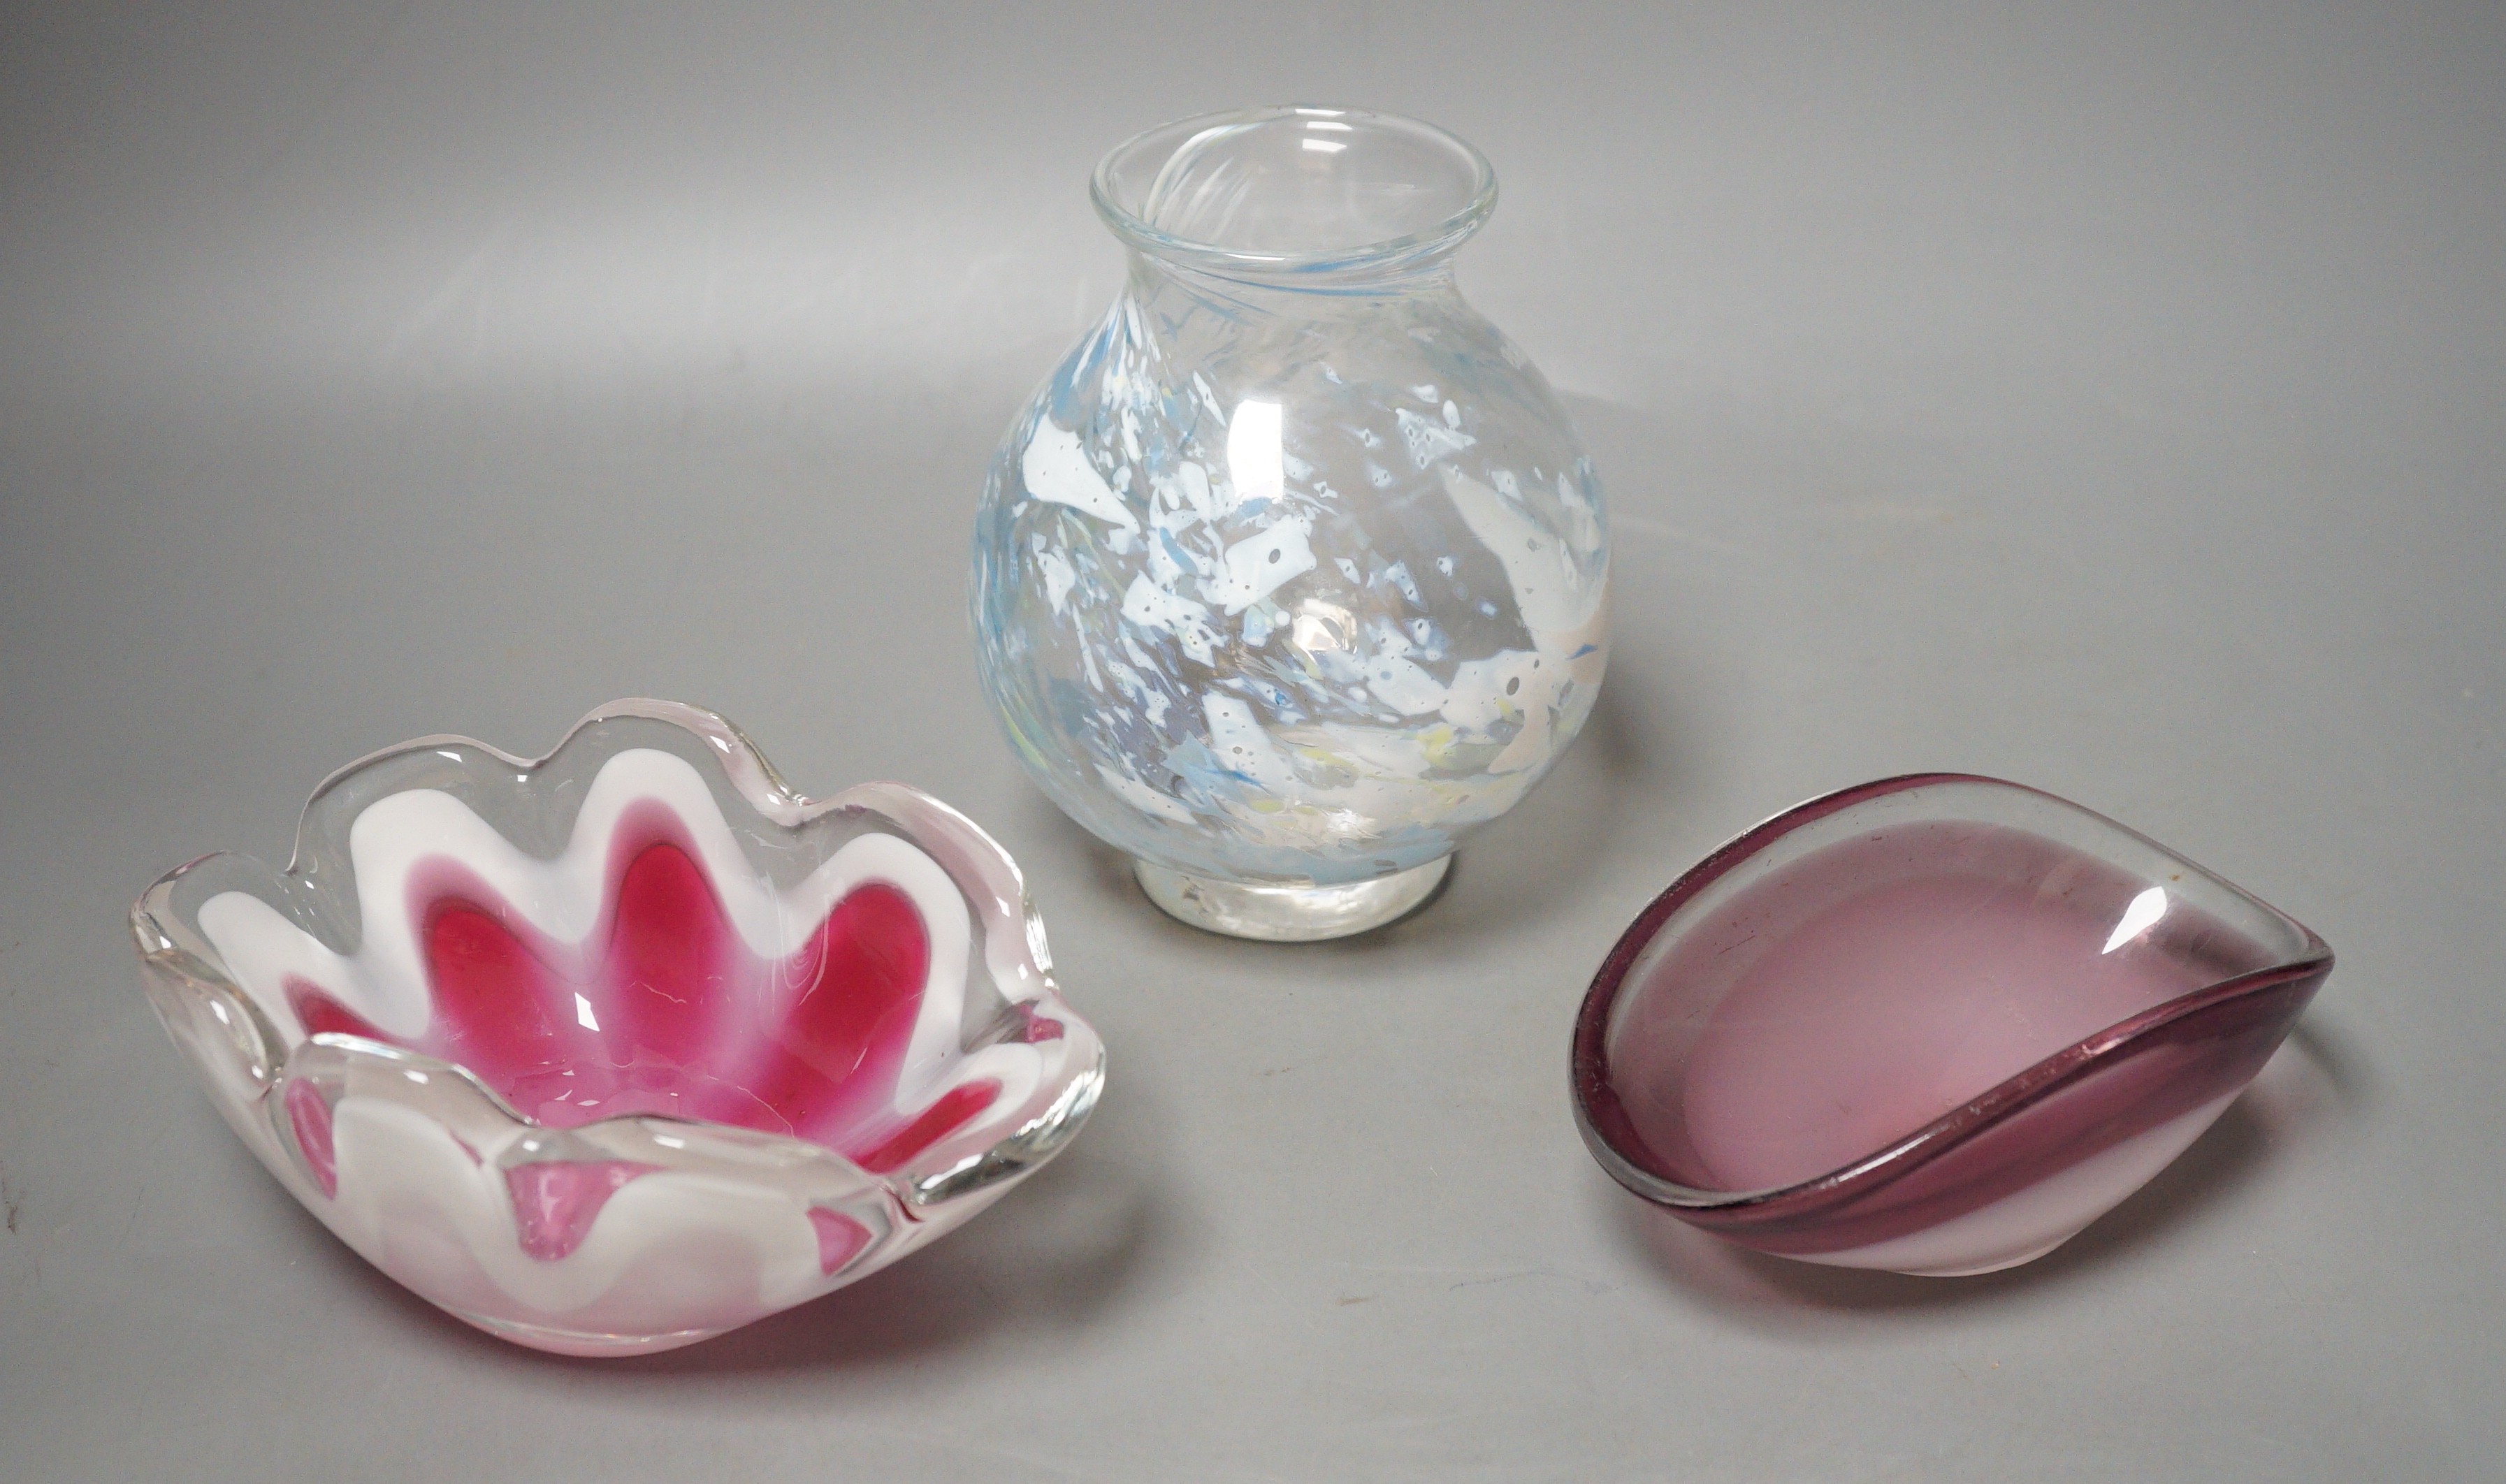 A Muller Freres studio glass vase and two Flygfoys (glass dishes) (3), tallest 13cm